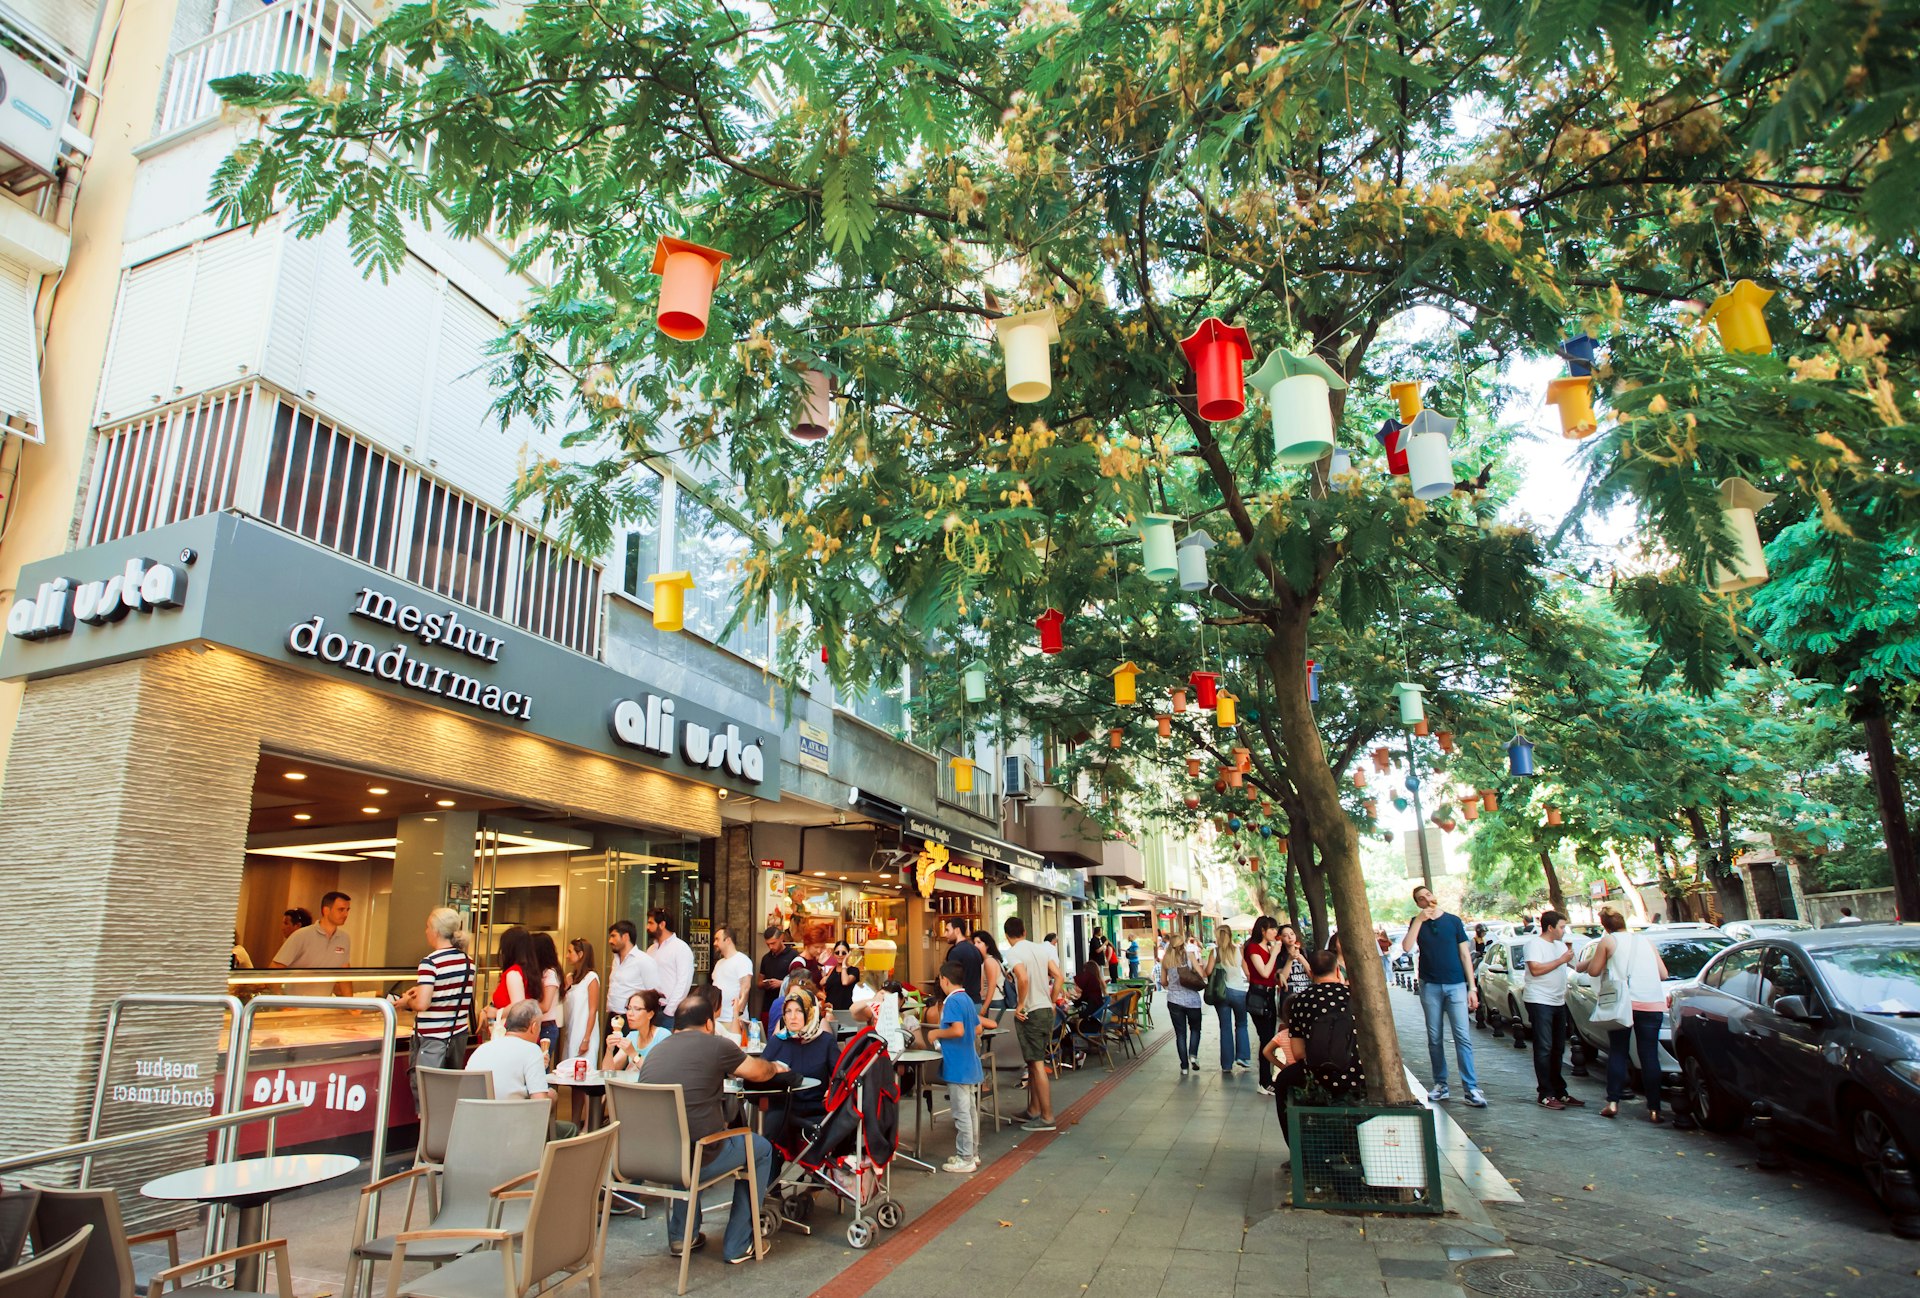 A tree-lined street with many people passing by. Some are sat outside a cafe to the left. The tree has colourful lanterns hanging from the branches